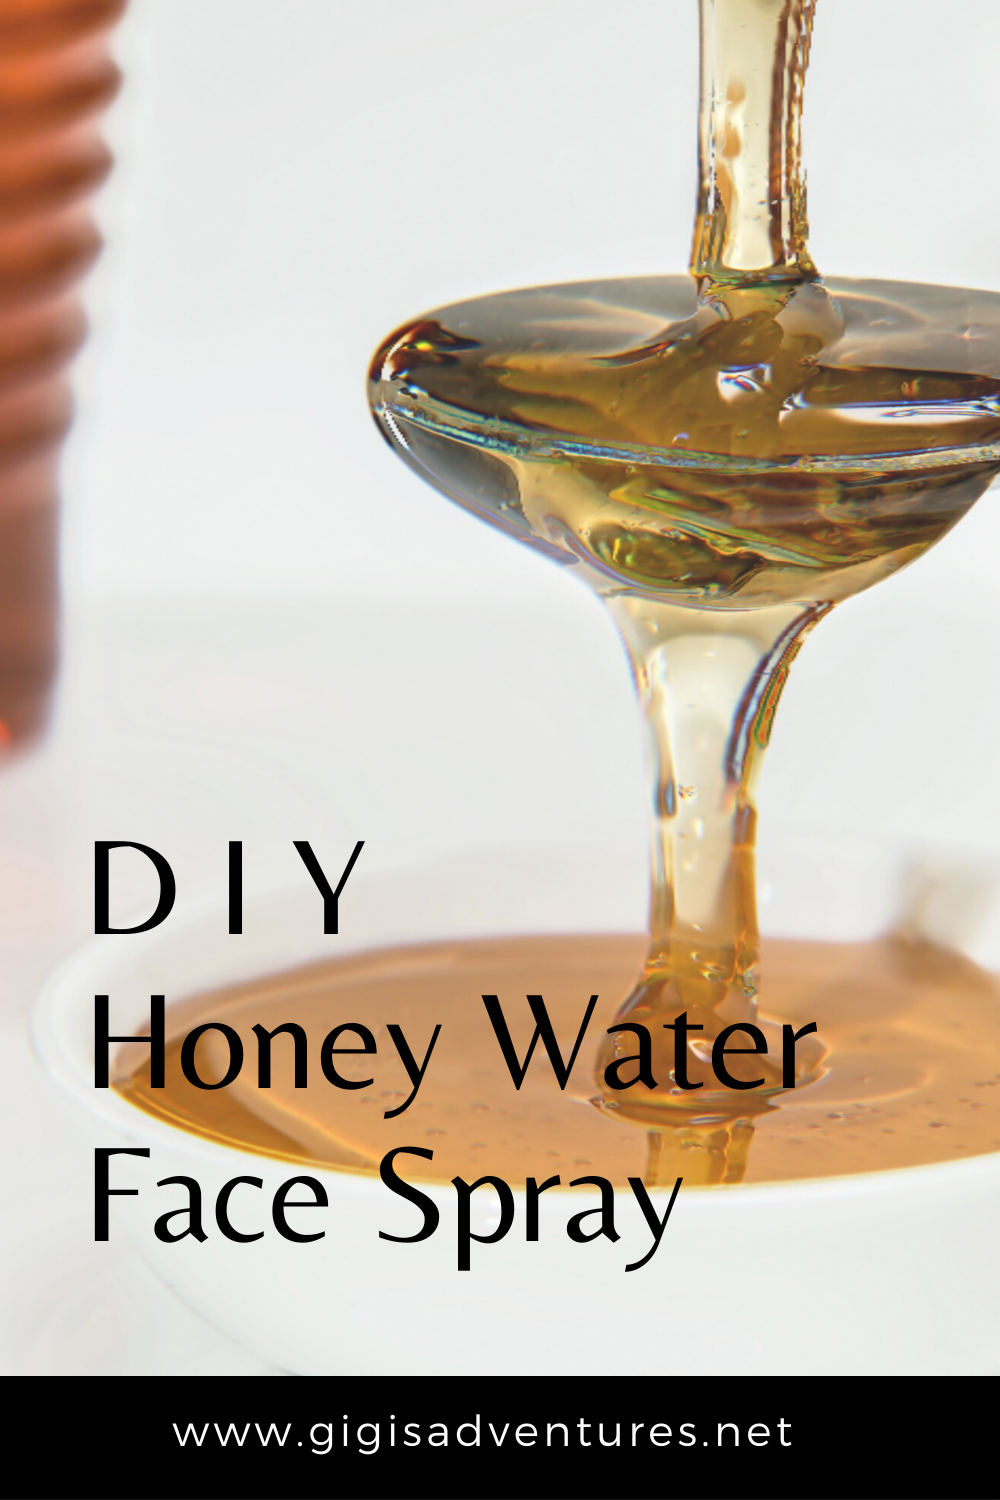 DIY Honey Water Face Spray - for Bright, Clear and Healthy Skin!